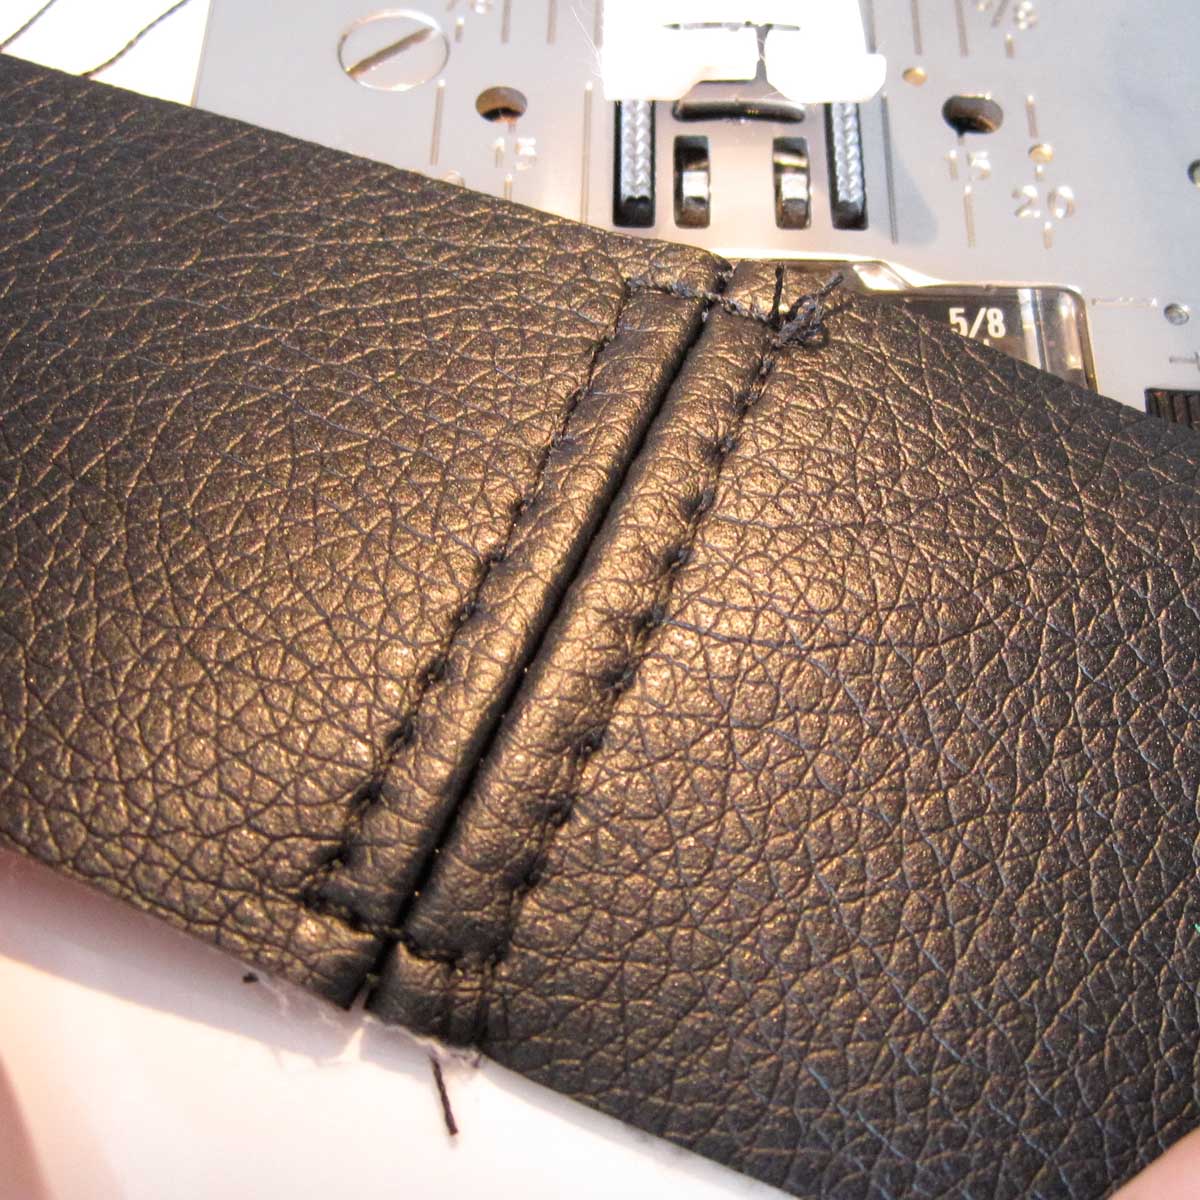 How to Make a Faux Leather Vinyl Handbag 